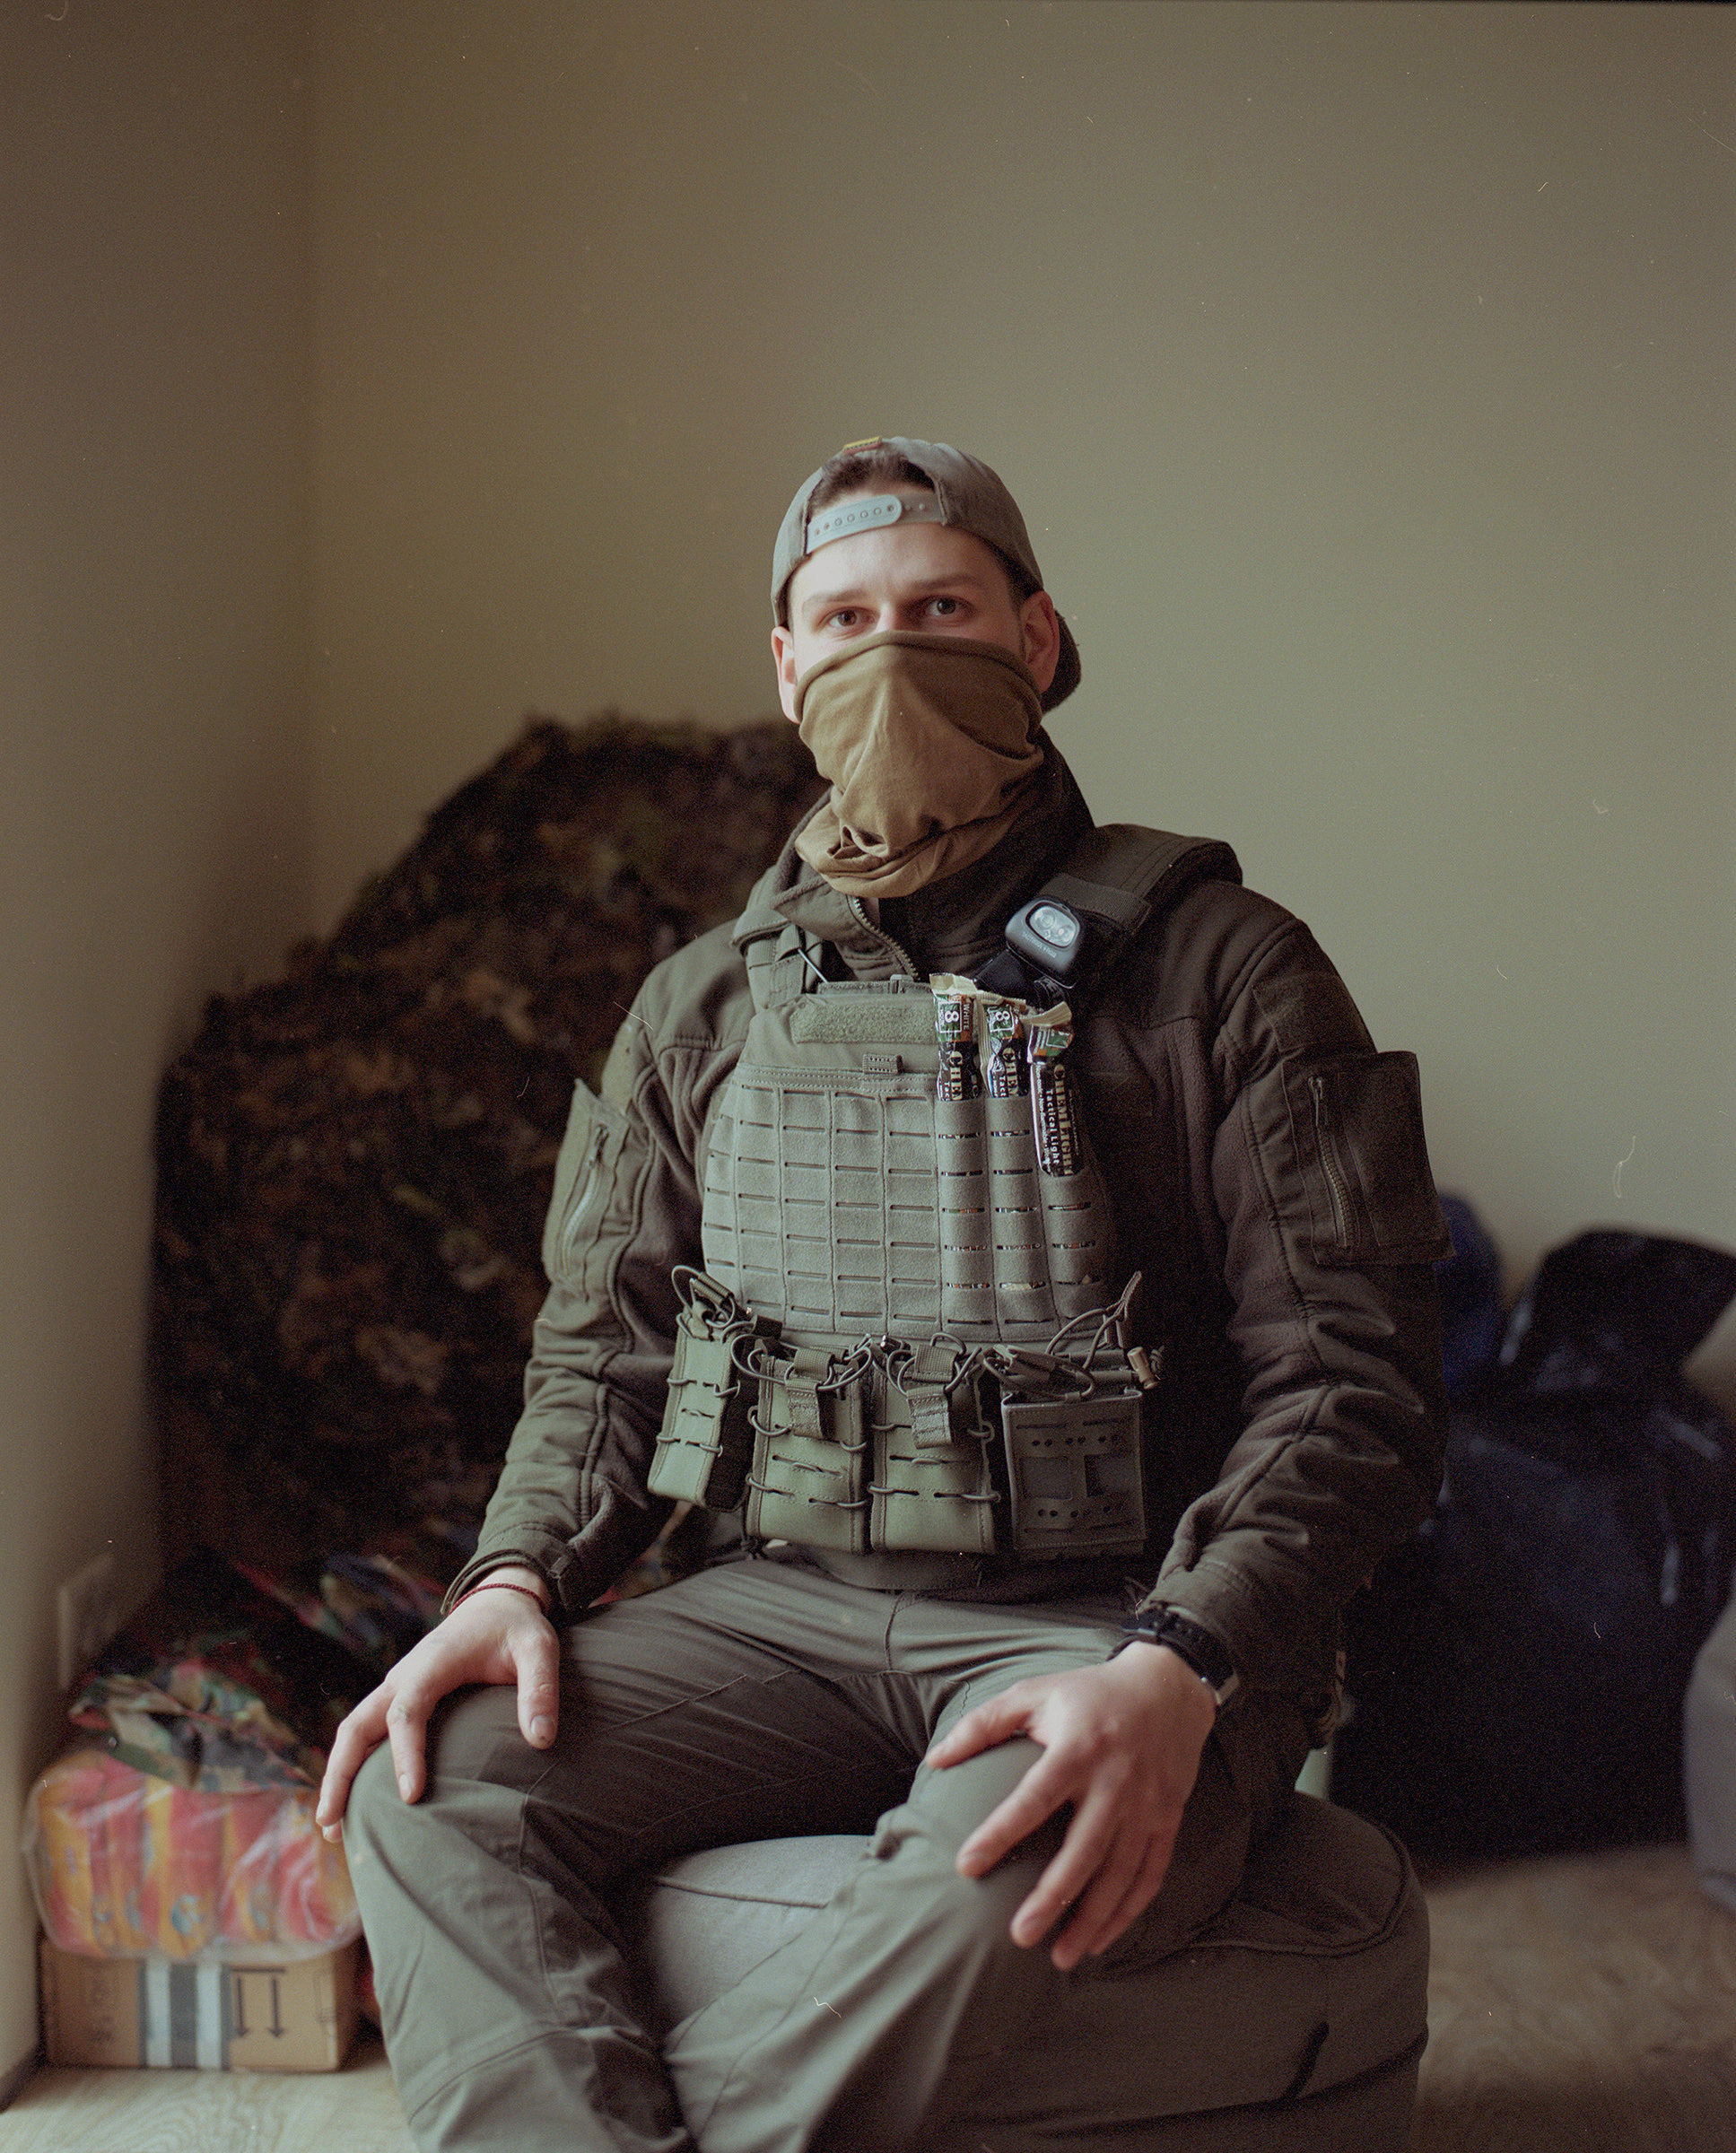 Mindaugas Jurkus, a 22-year-old who plans to work in the Ukrainian-Lithuanian training center in Lviv and travel to the front lines as a paramedic, on March 4. (Tadas Kazakevicius for TIME)